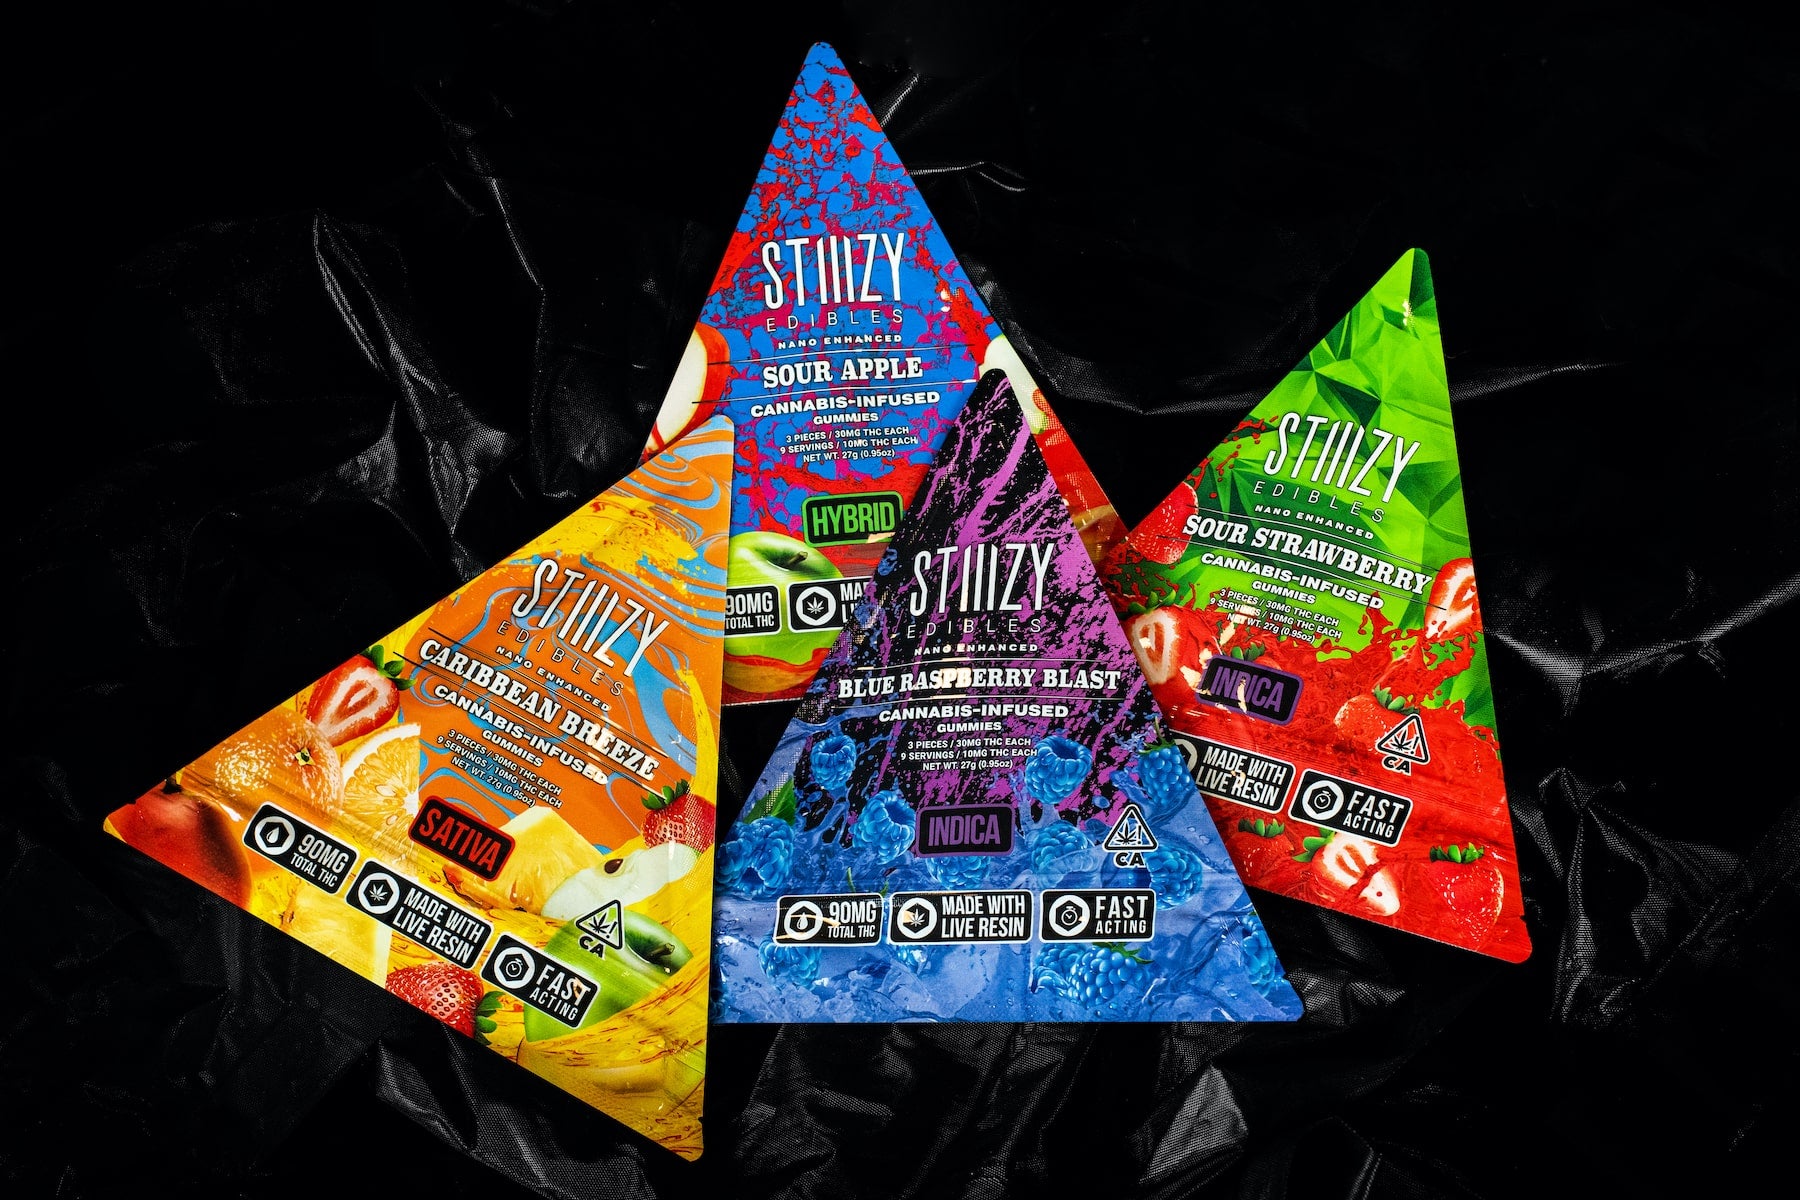 INTRODUCING OUR NEWEST LINE OF FAST-ACTING EDIBLES!